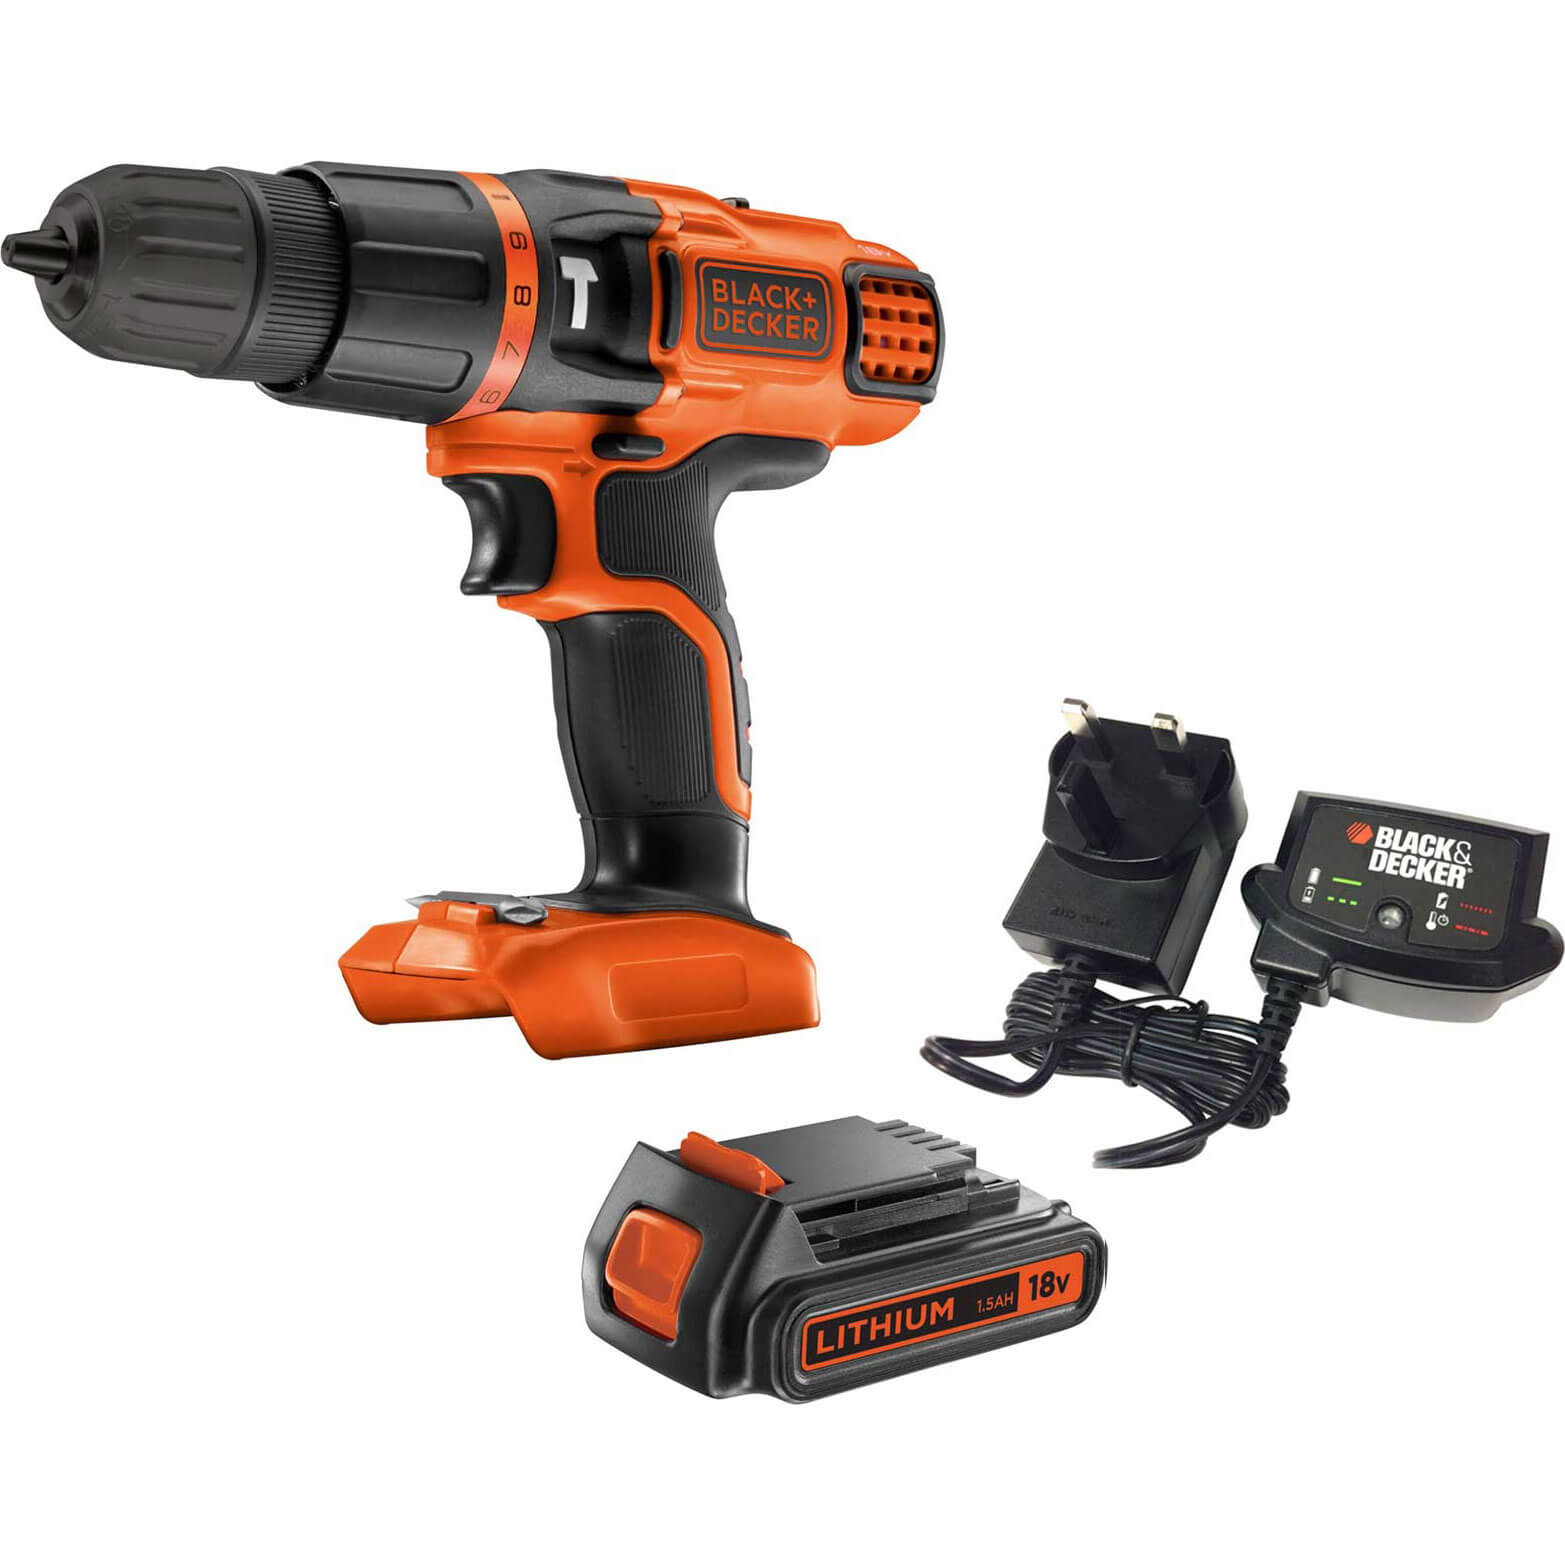 Image of Black and Decker BDCH188 18v Cordless Combi Drill 1 x 1.5ah Li-ion Charger No Case